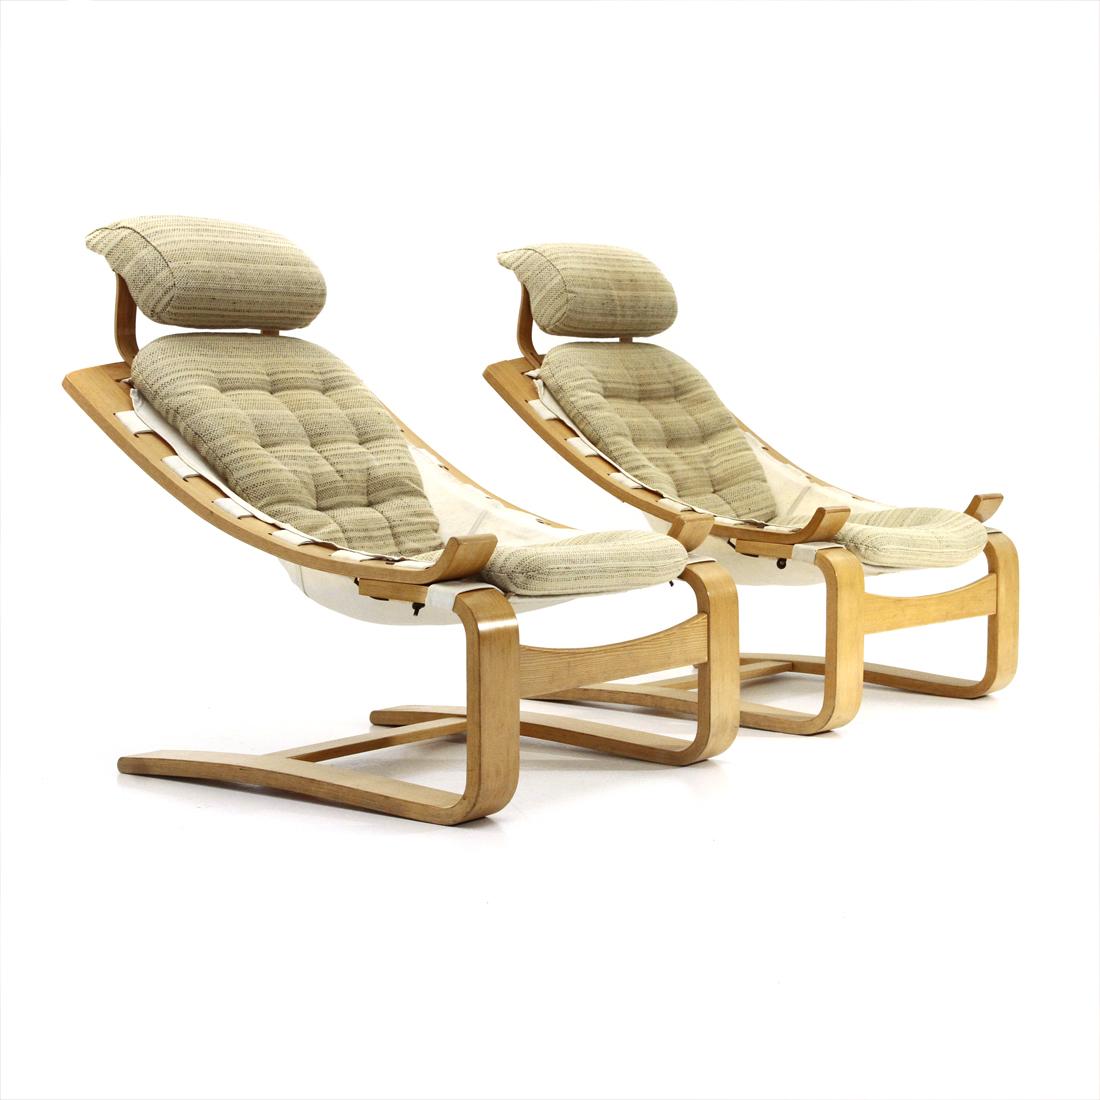 Pair of Swedish-made armchairs produced by Nelo Mobel in the 1970s based on Ake Fribytter's design.
Elastic structure in natural pine.
Cushions and shell in natural hemp.
Leather rope.
Good general condition, some signs due to normal use over